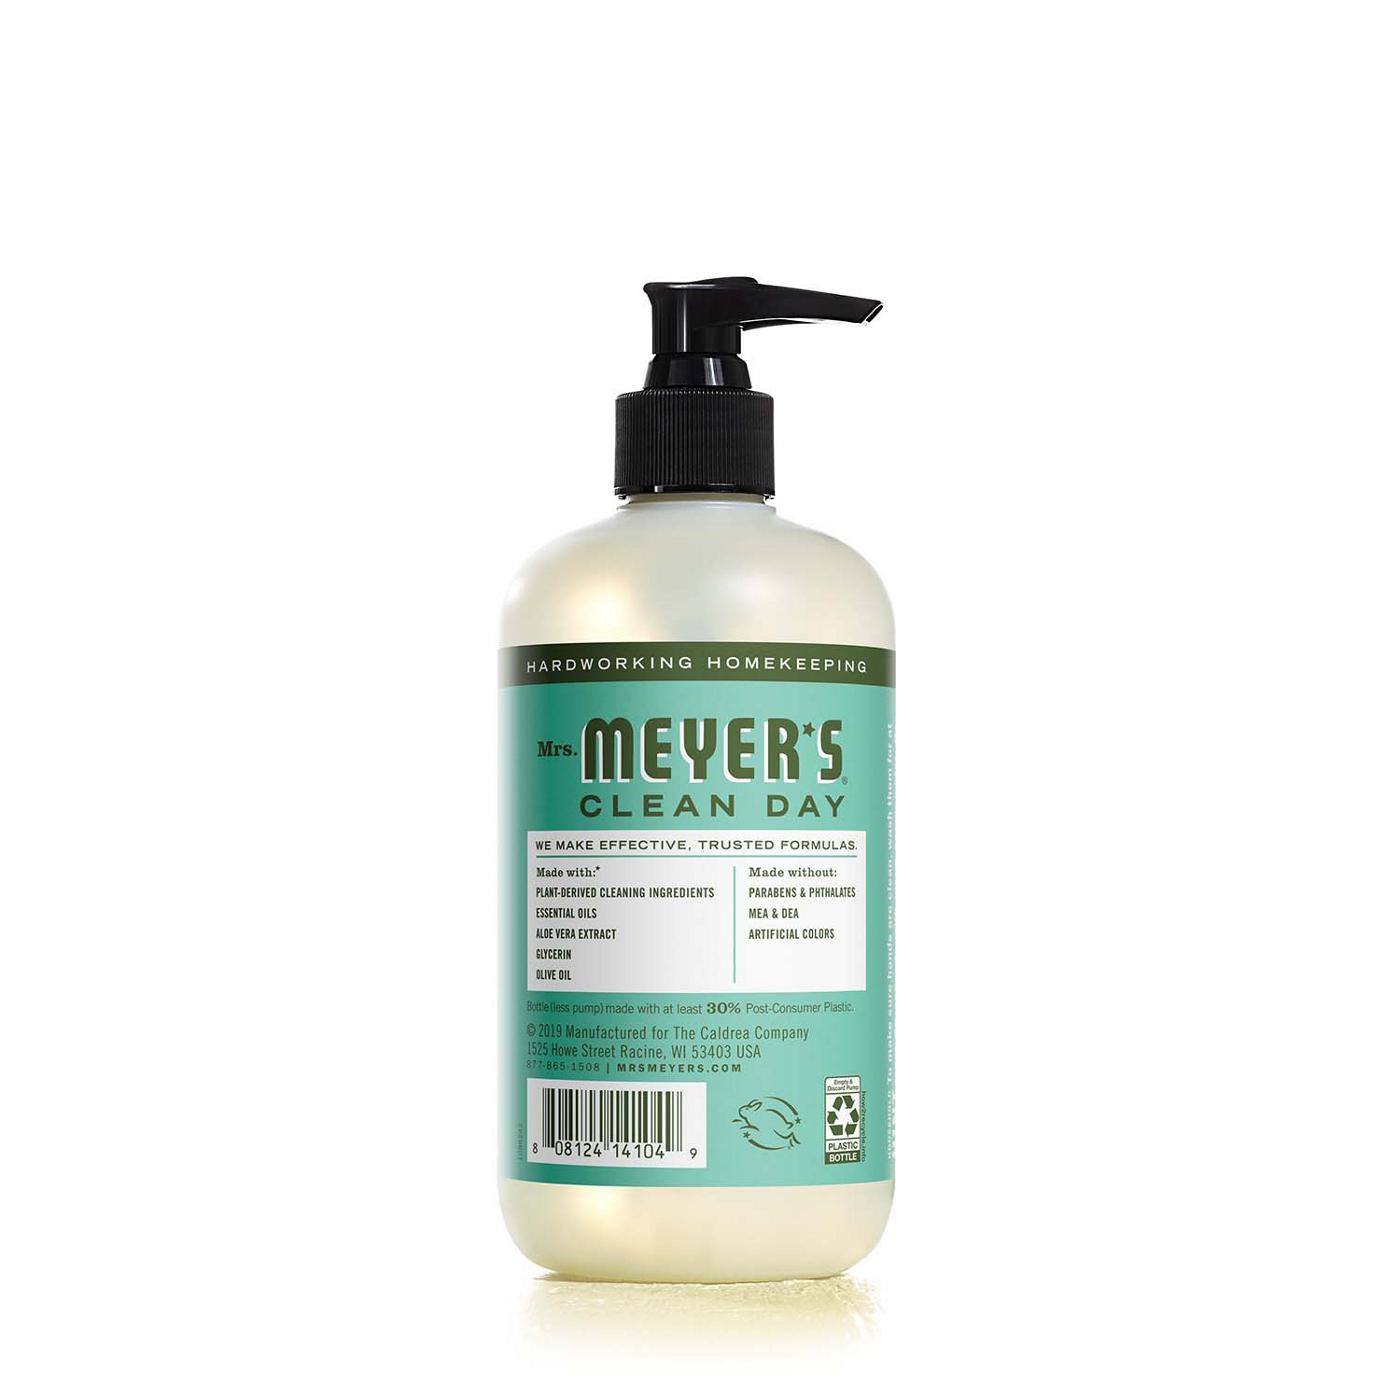 Mrs. Meyer's Clean Day Basil Scent Liquid Hand Soap; image 6 of 6